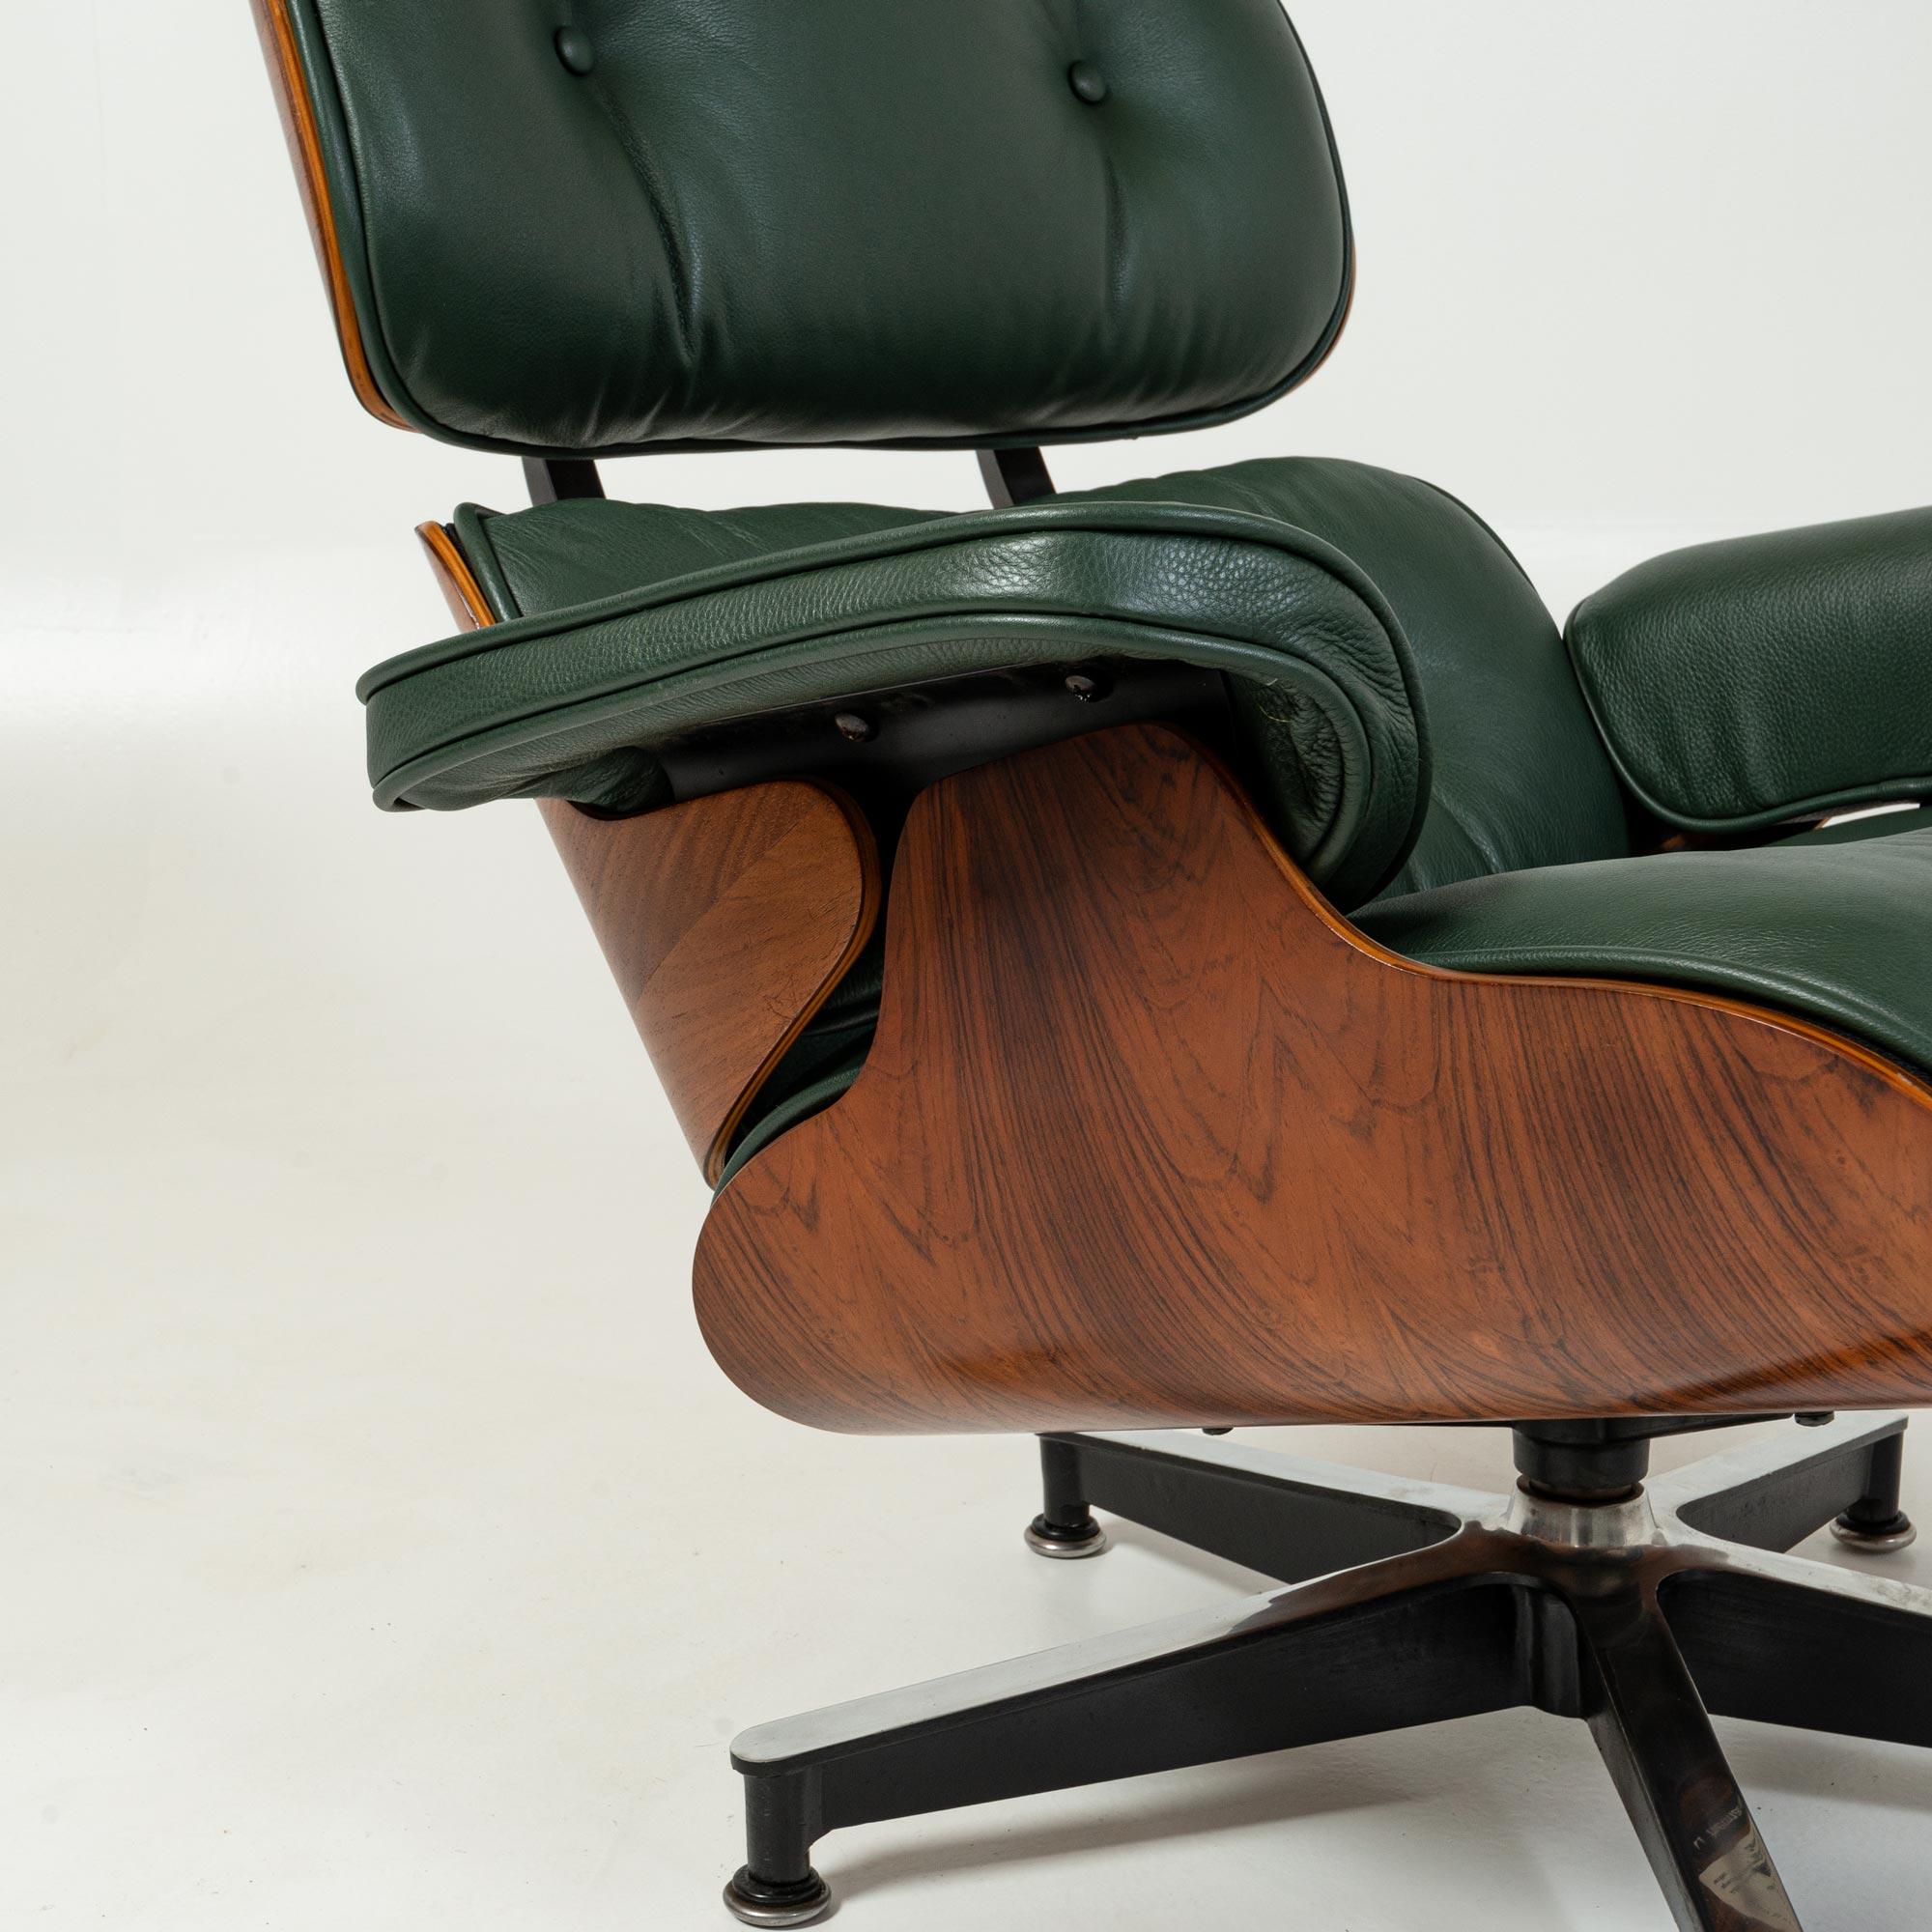 Late 20th Century 3rd Gen Eames Lounge Chair 670-671 in Elmo Baltique Forest Green Leather